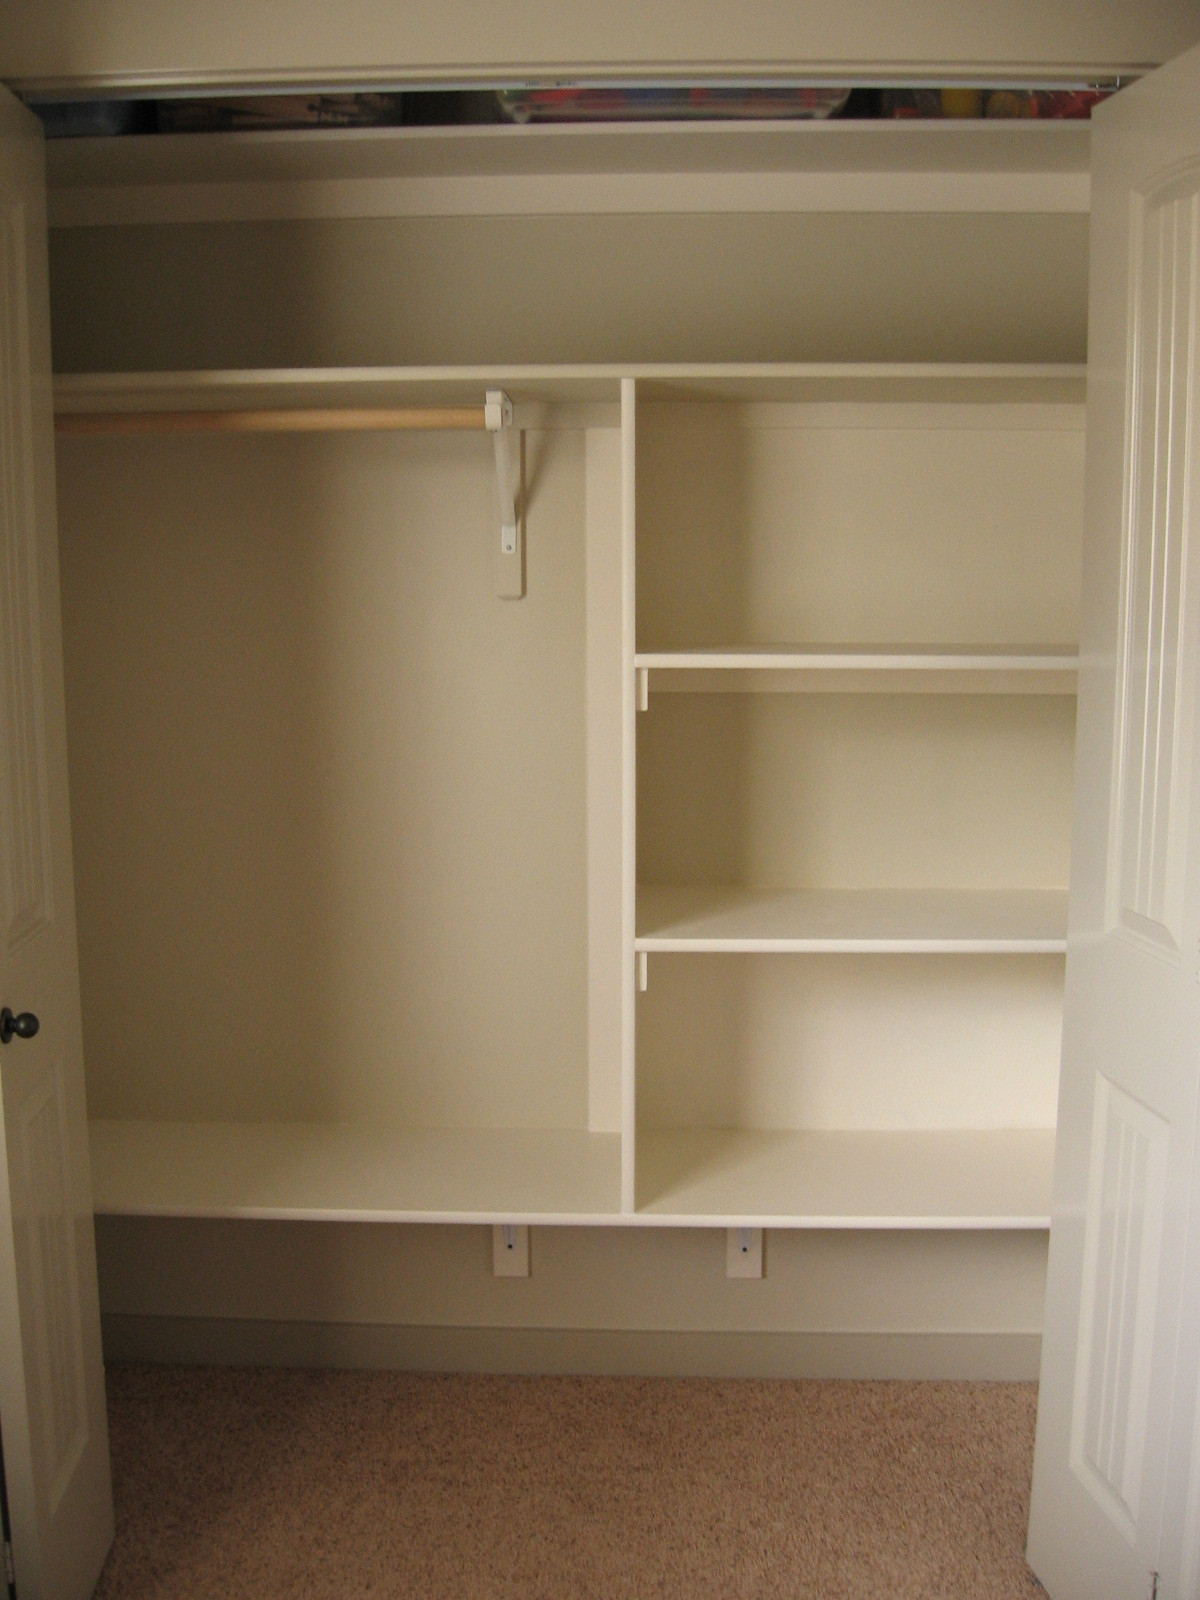 DIY Closet Shelves Plans
 Pickup Some Creativity The trouble with closets